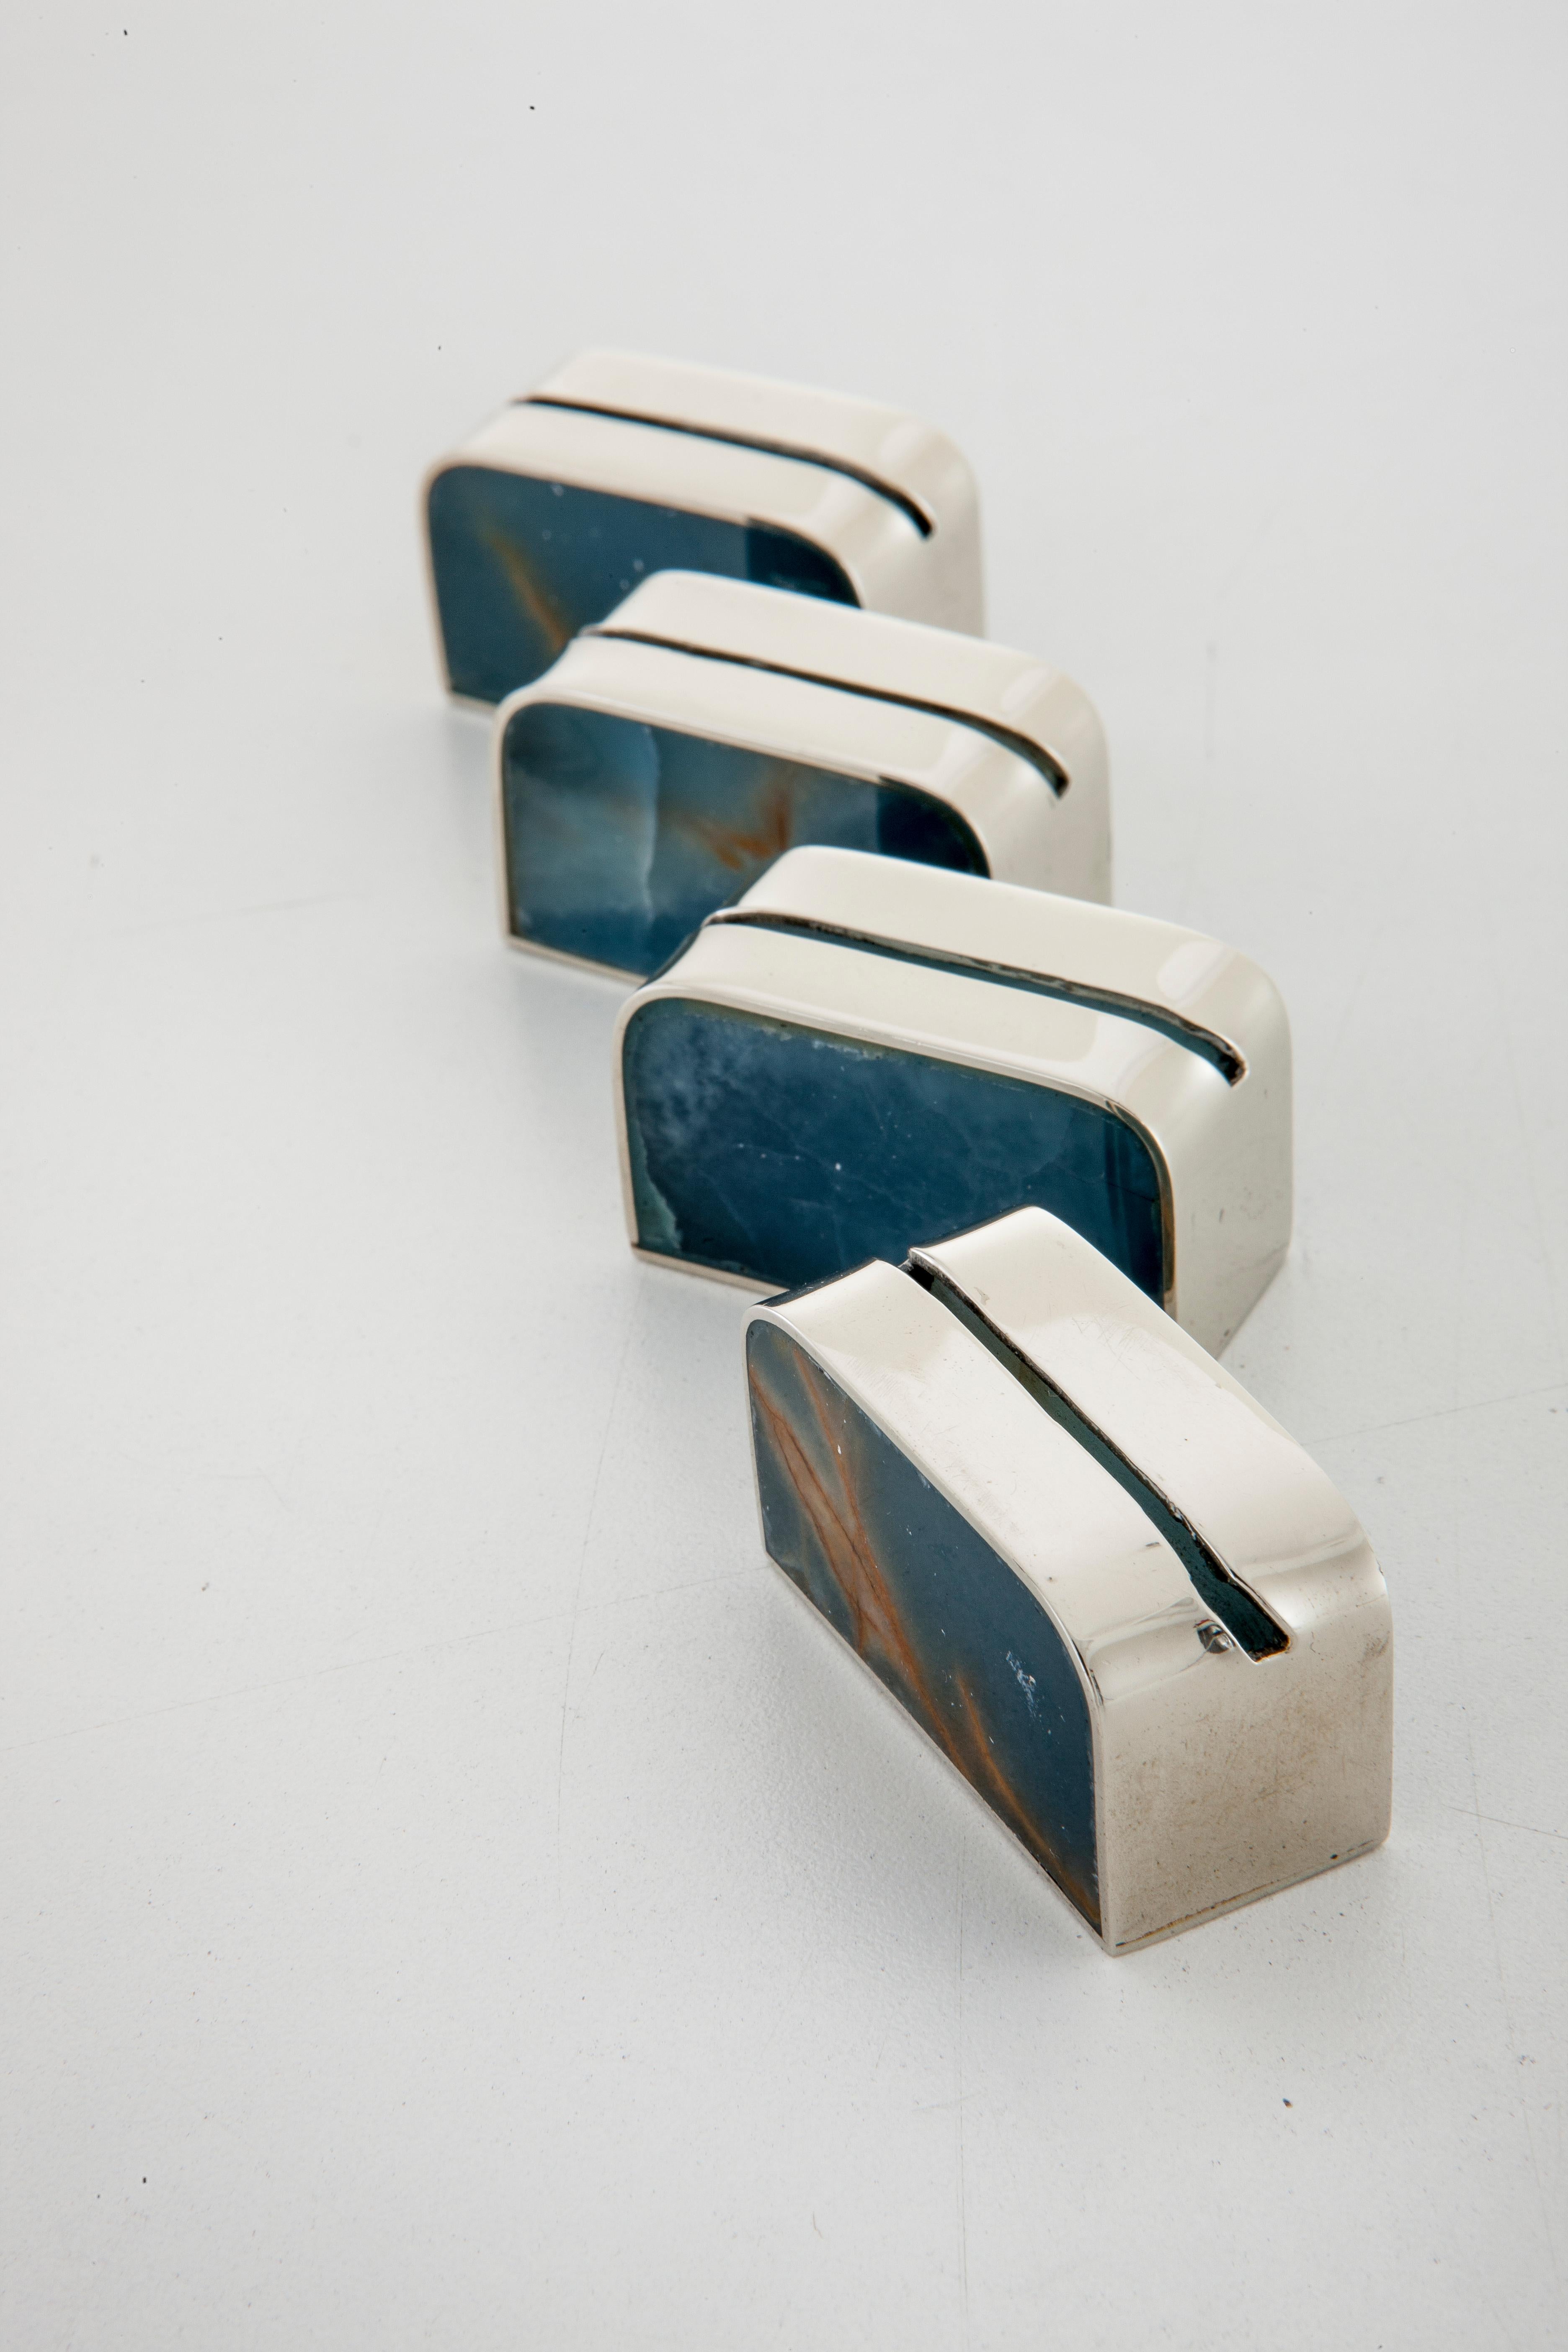 Argentine Salta Place Card Holders, Alpaca Silver & Blue Natural Onyx Stone For Sale